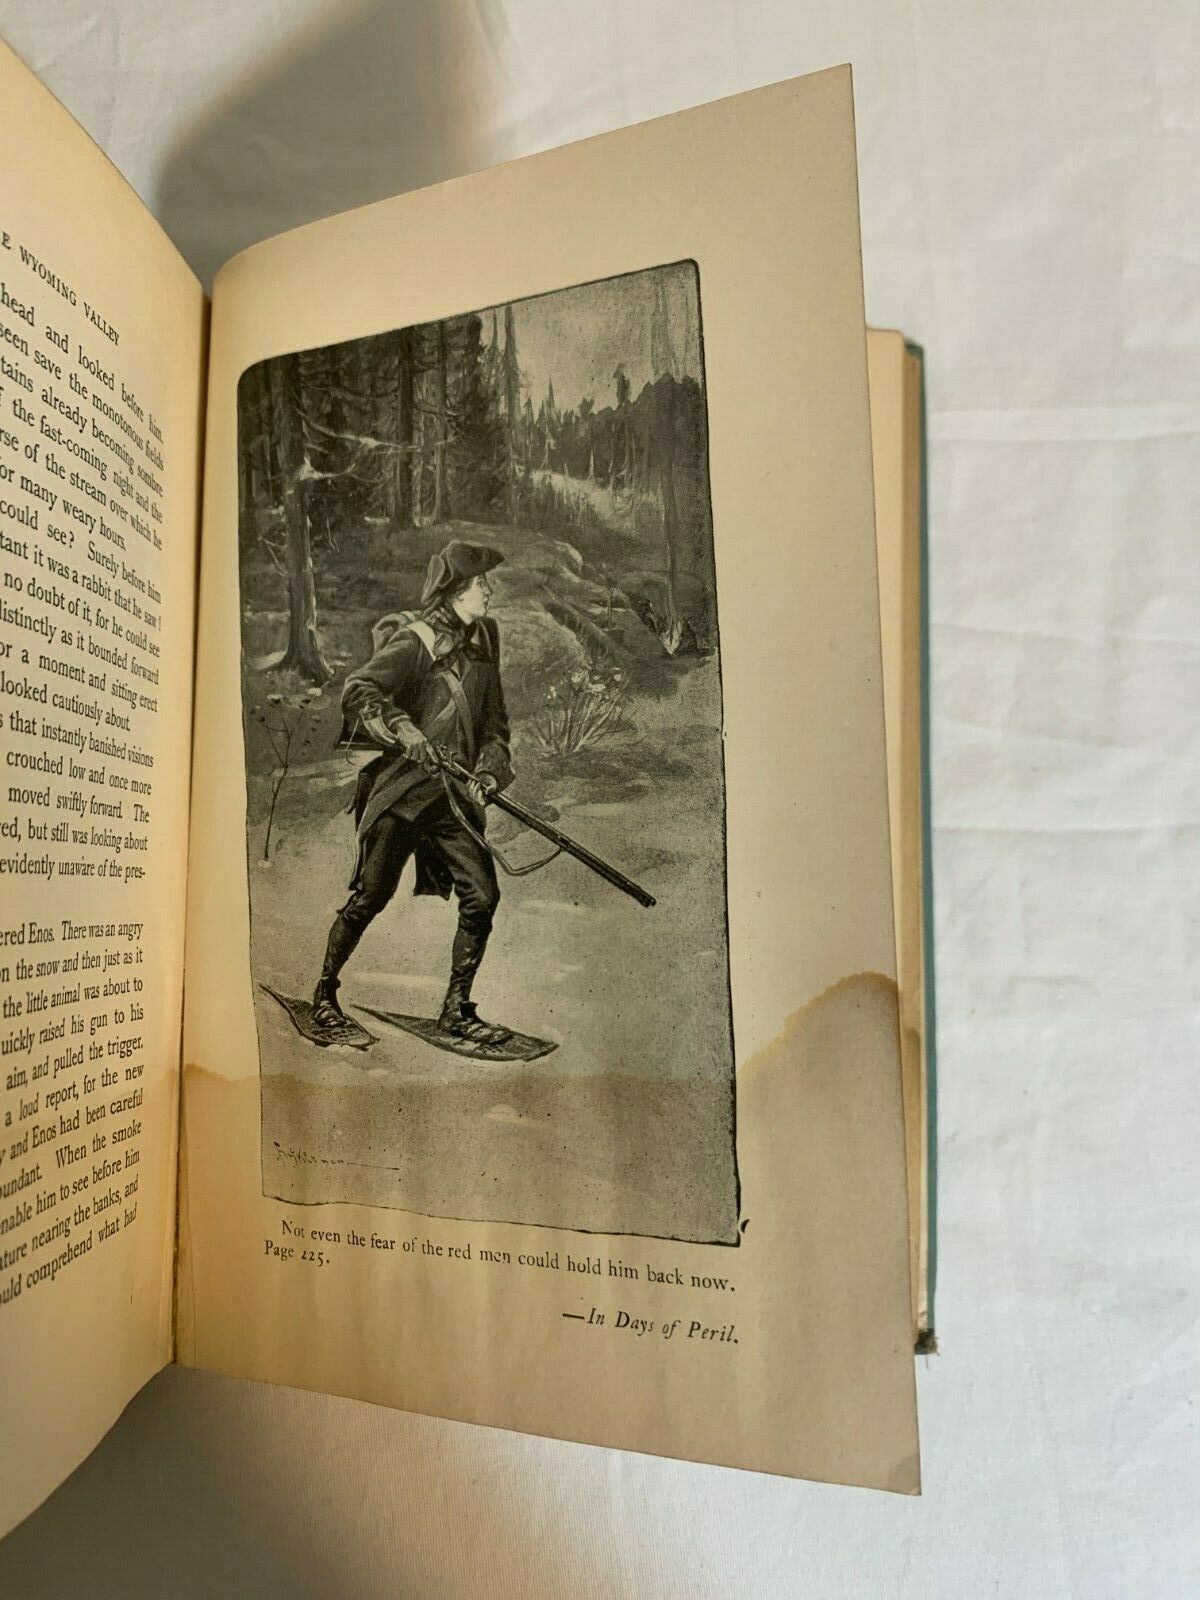 In Days of Peril: A Boy's Story of the Massacre, Everett T. Tomlinson, 1901 (C1)